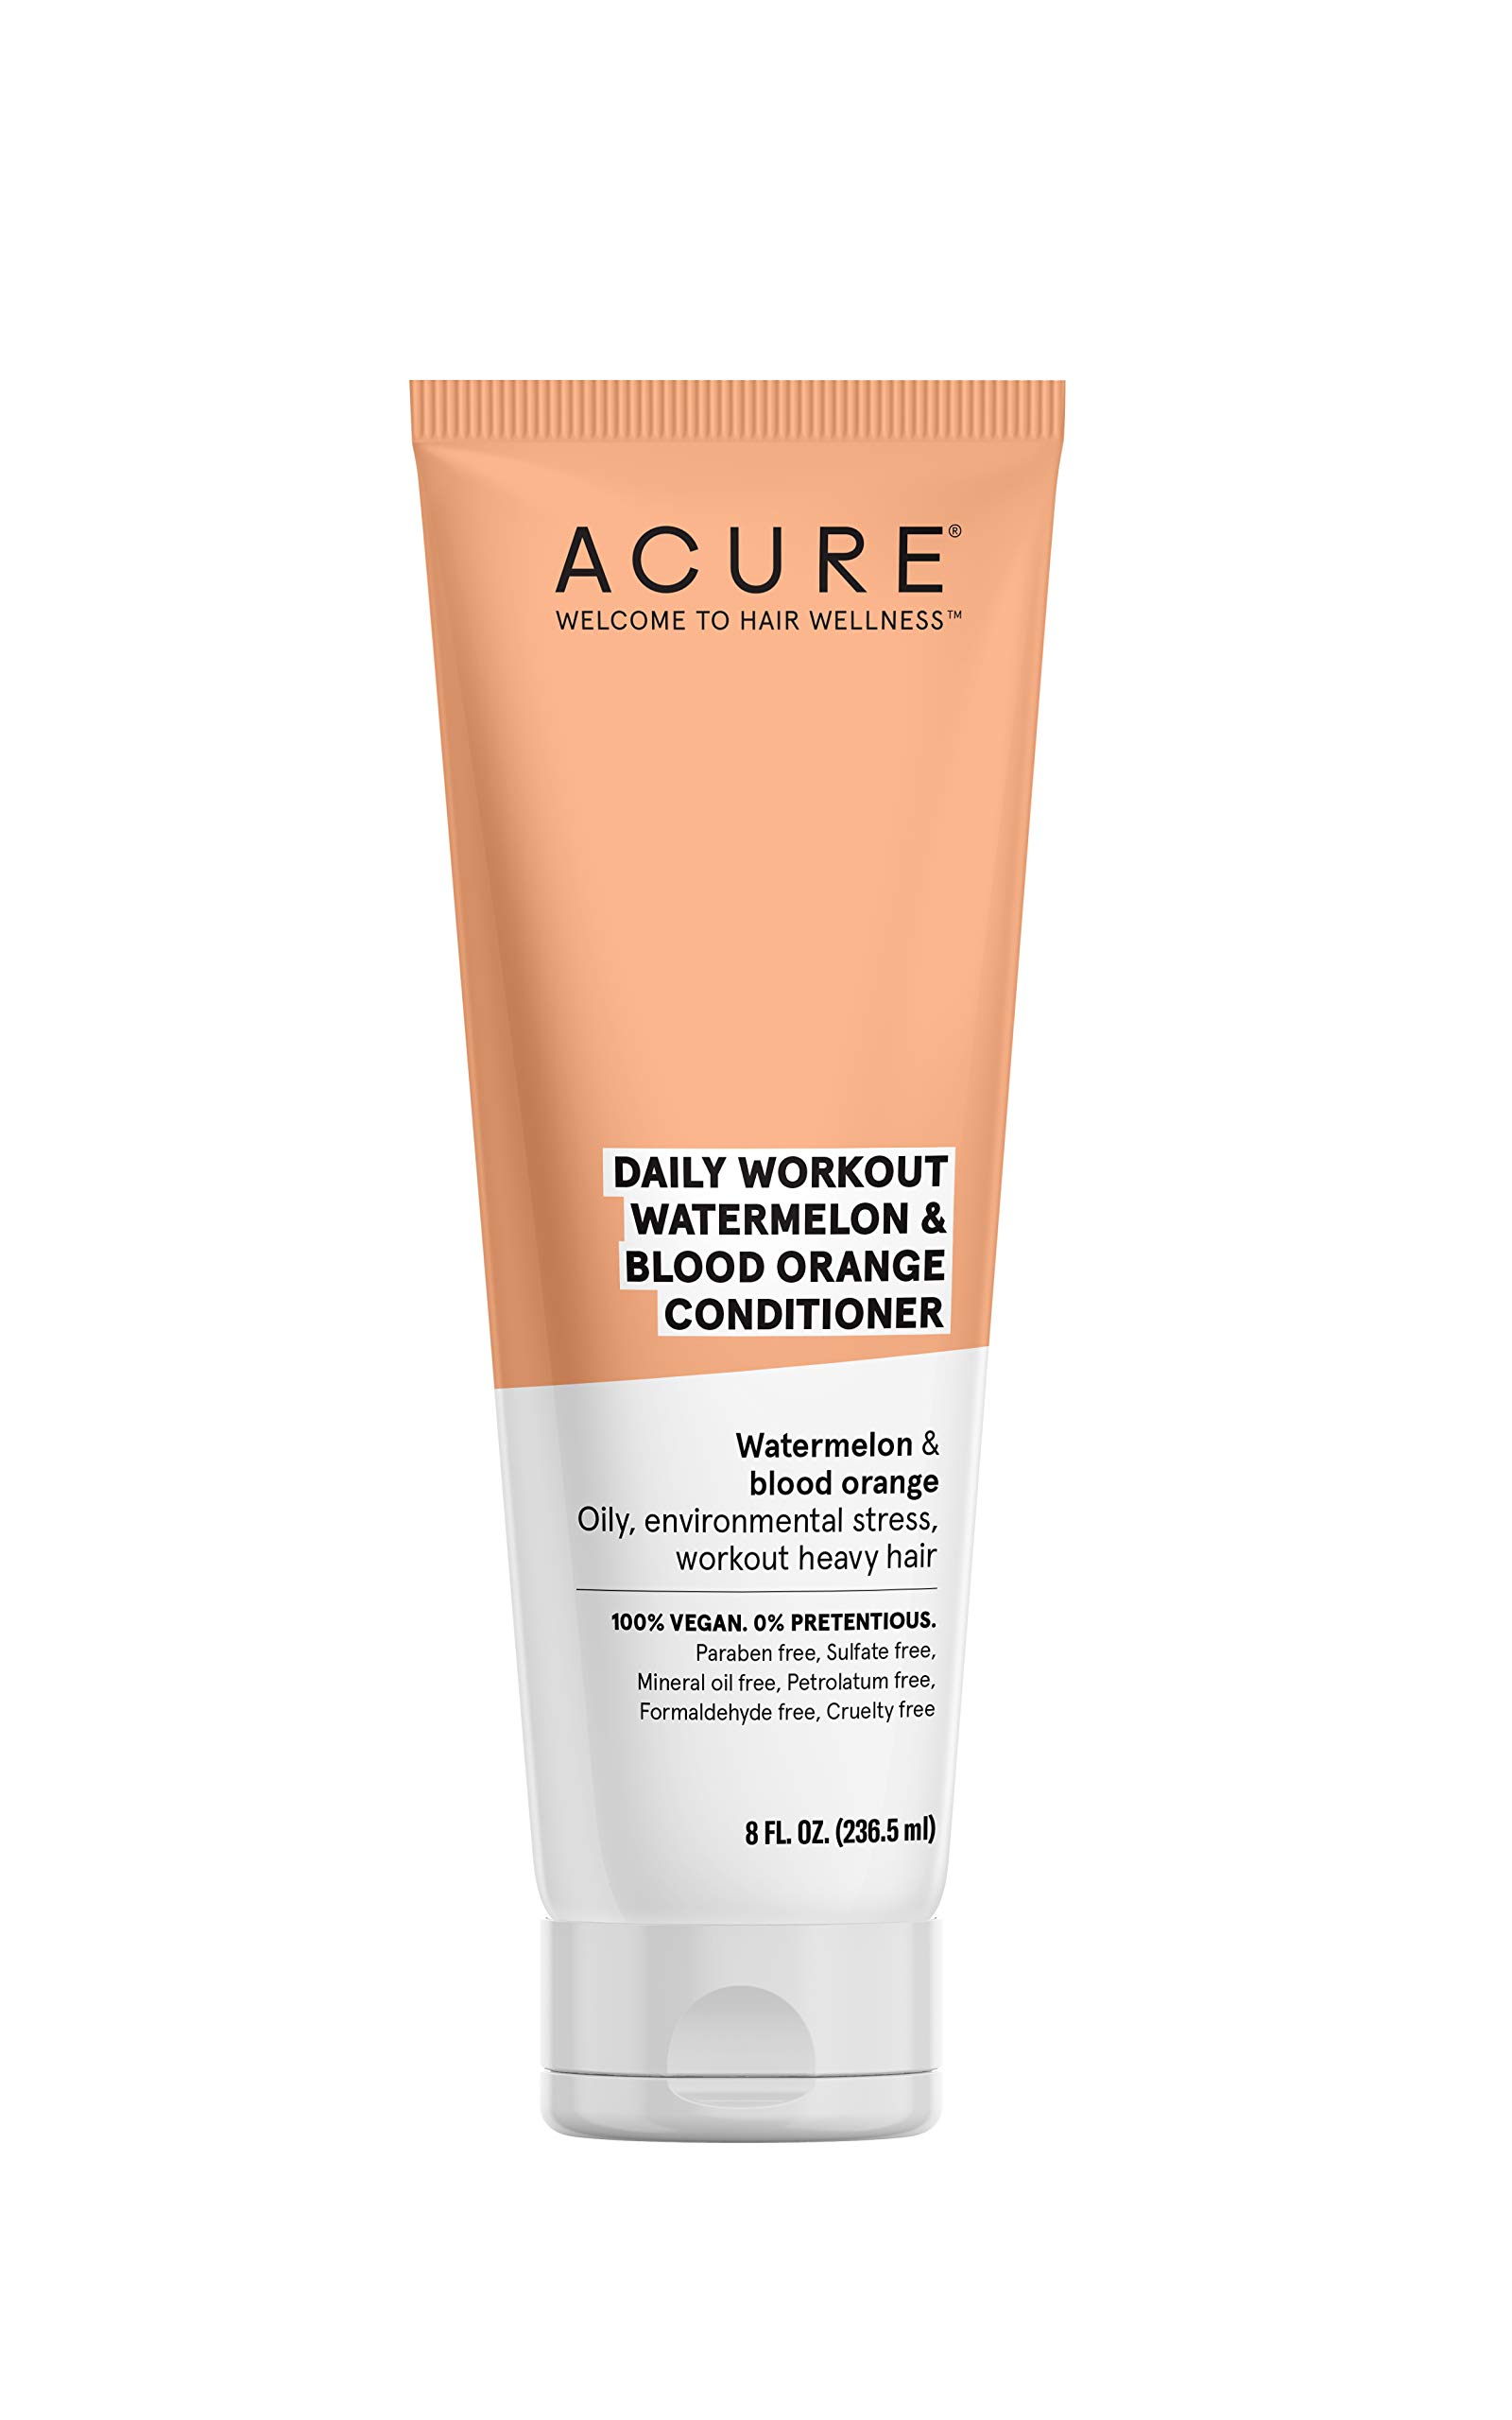 Acure Daily Workout Watermelon Conditioner | 100% Vegan | For Oily, Environmental Stressed, Workout Heavy Hair | Watermelon & Blood Orange - Gentle Everyday Formula | 8 Fl Oz